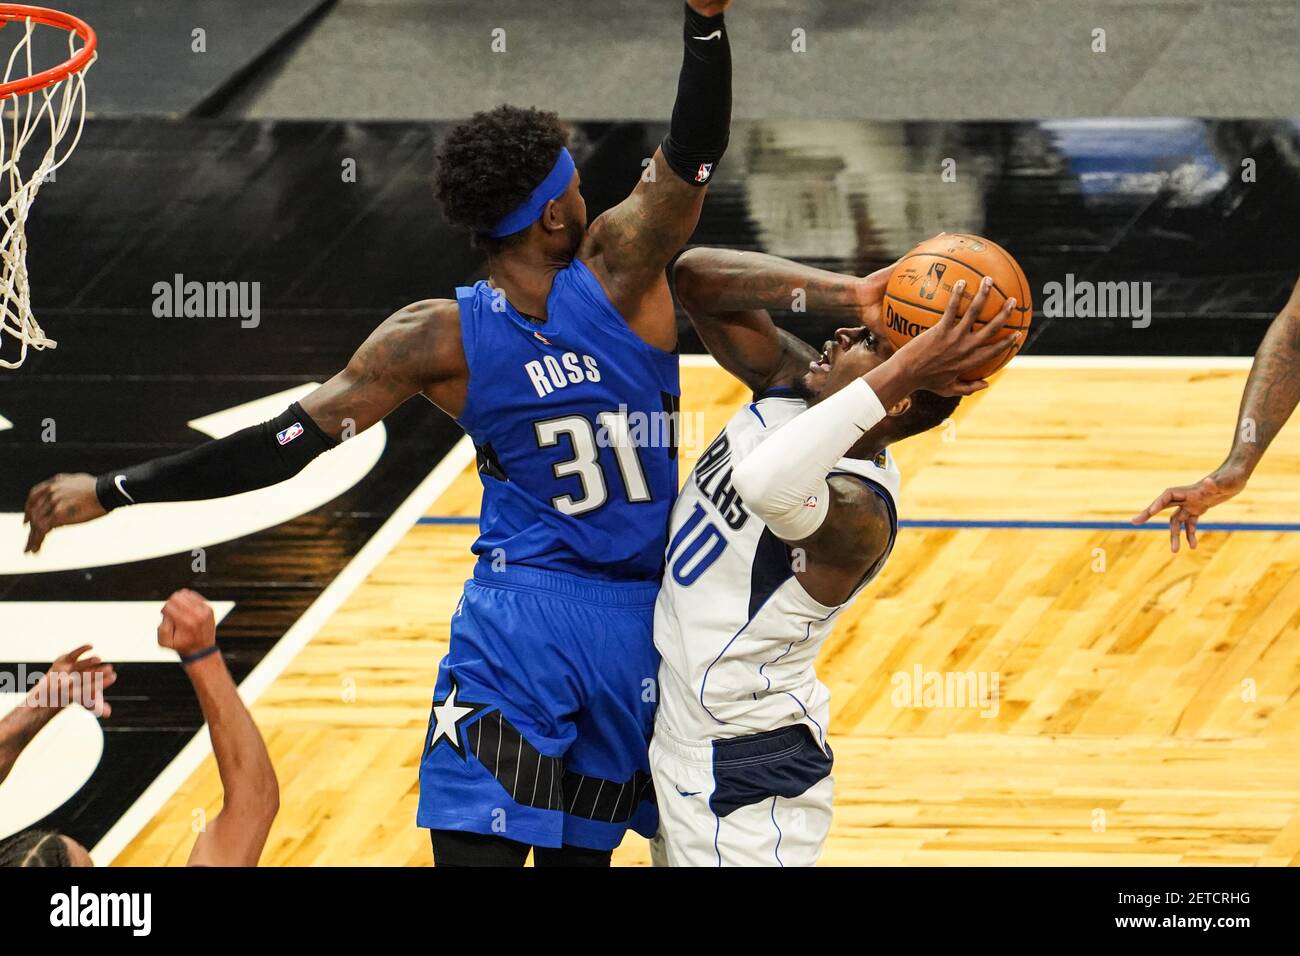 Orlando, Florida, USA, March 1, 2021, Dallas Mavericks player Dorian Finney-Smith #10 attempt to make a basket at the Amway Center (Photo Credit: Marty Jean-Louis/Alamy Live News Stock Photo